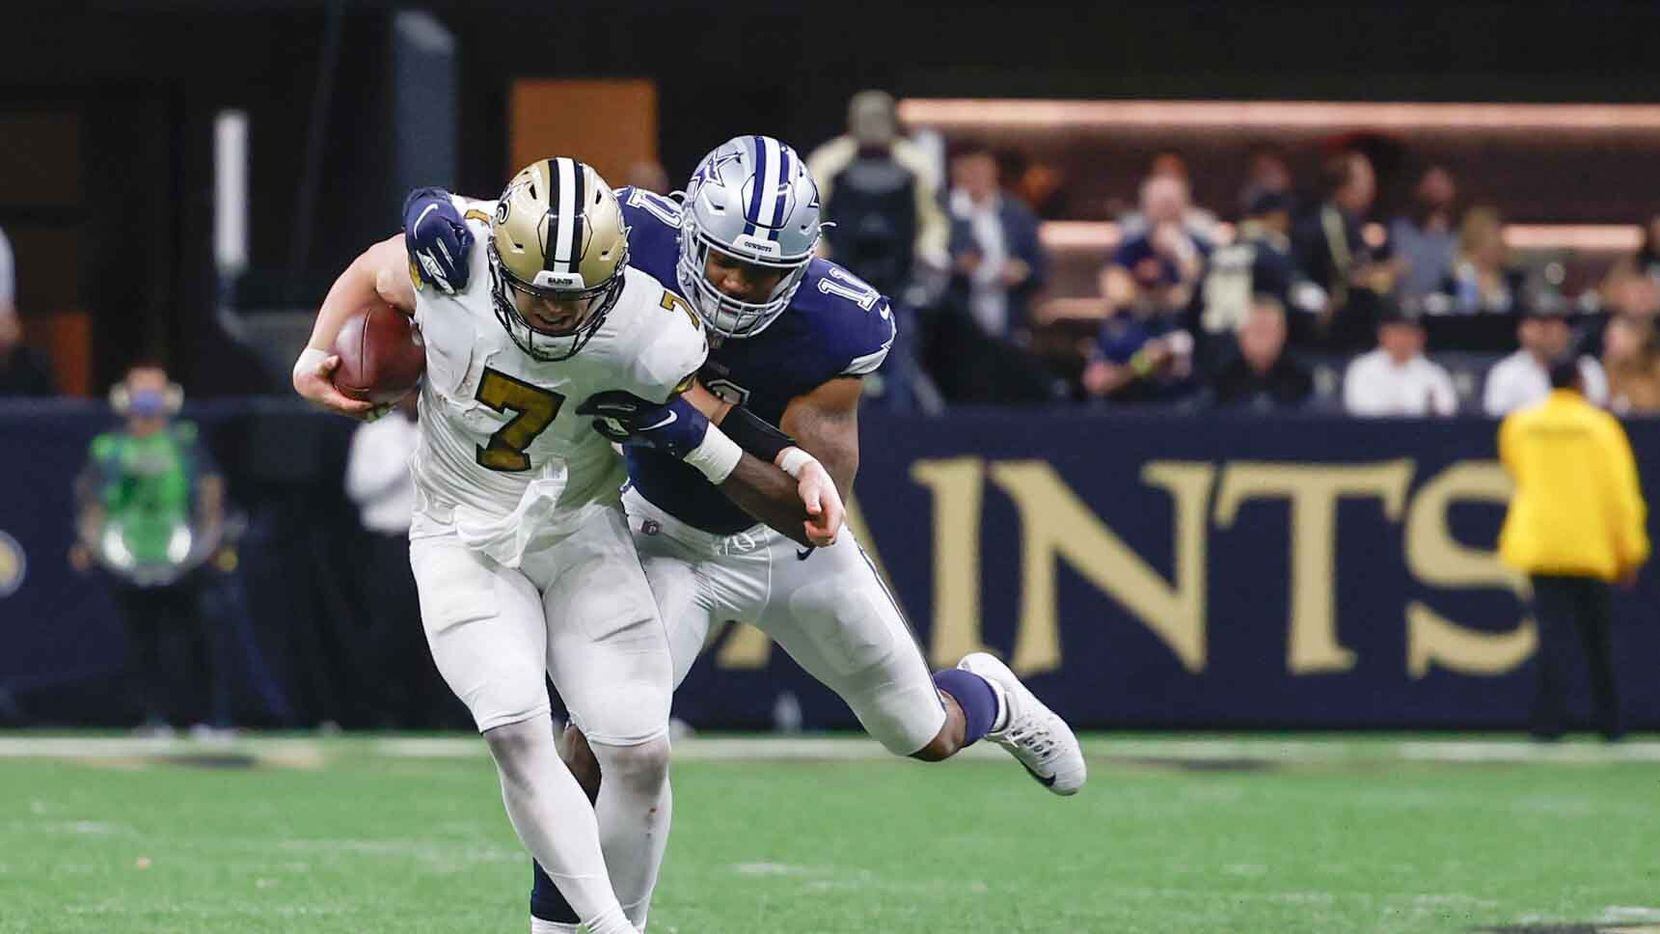 New Orleans Saints quaterback Taysom Hill (7) gets tackled by Dallas Cowboys linebacker Micah Parsons (11) during the second half at the Caesars Superdome in New Orleans, Louisiana December 2, 2021.